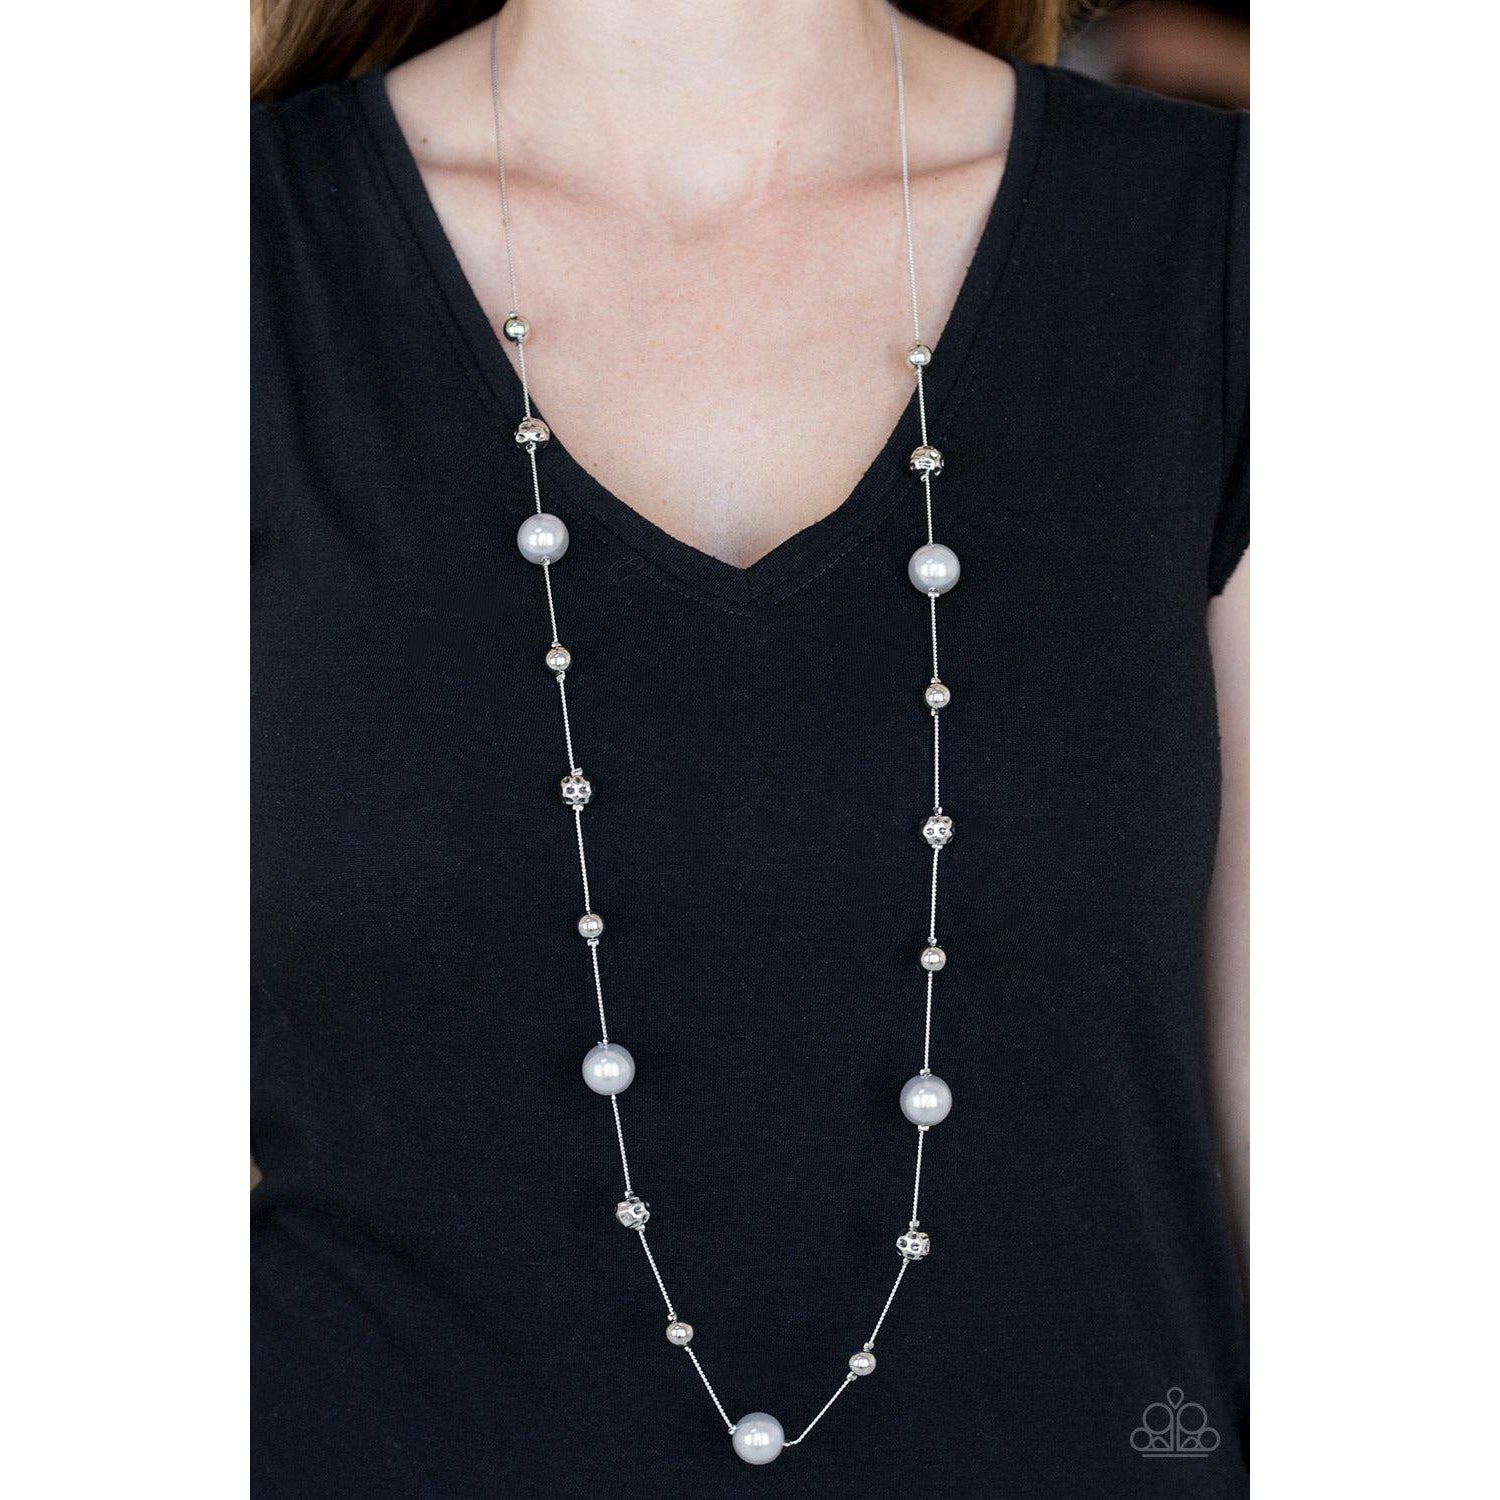 Paparazzi Eloquently Eloquent Silver Necklace & Earrings Set-Necklace-SPARKLE ARMAND